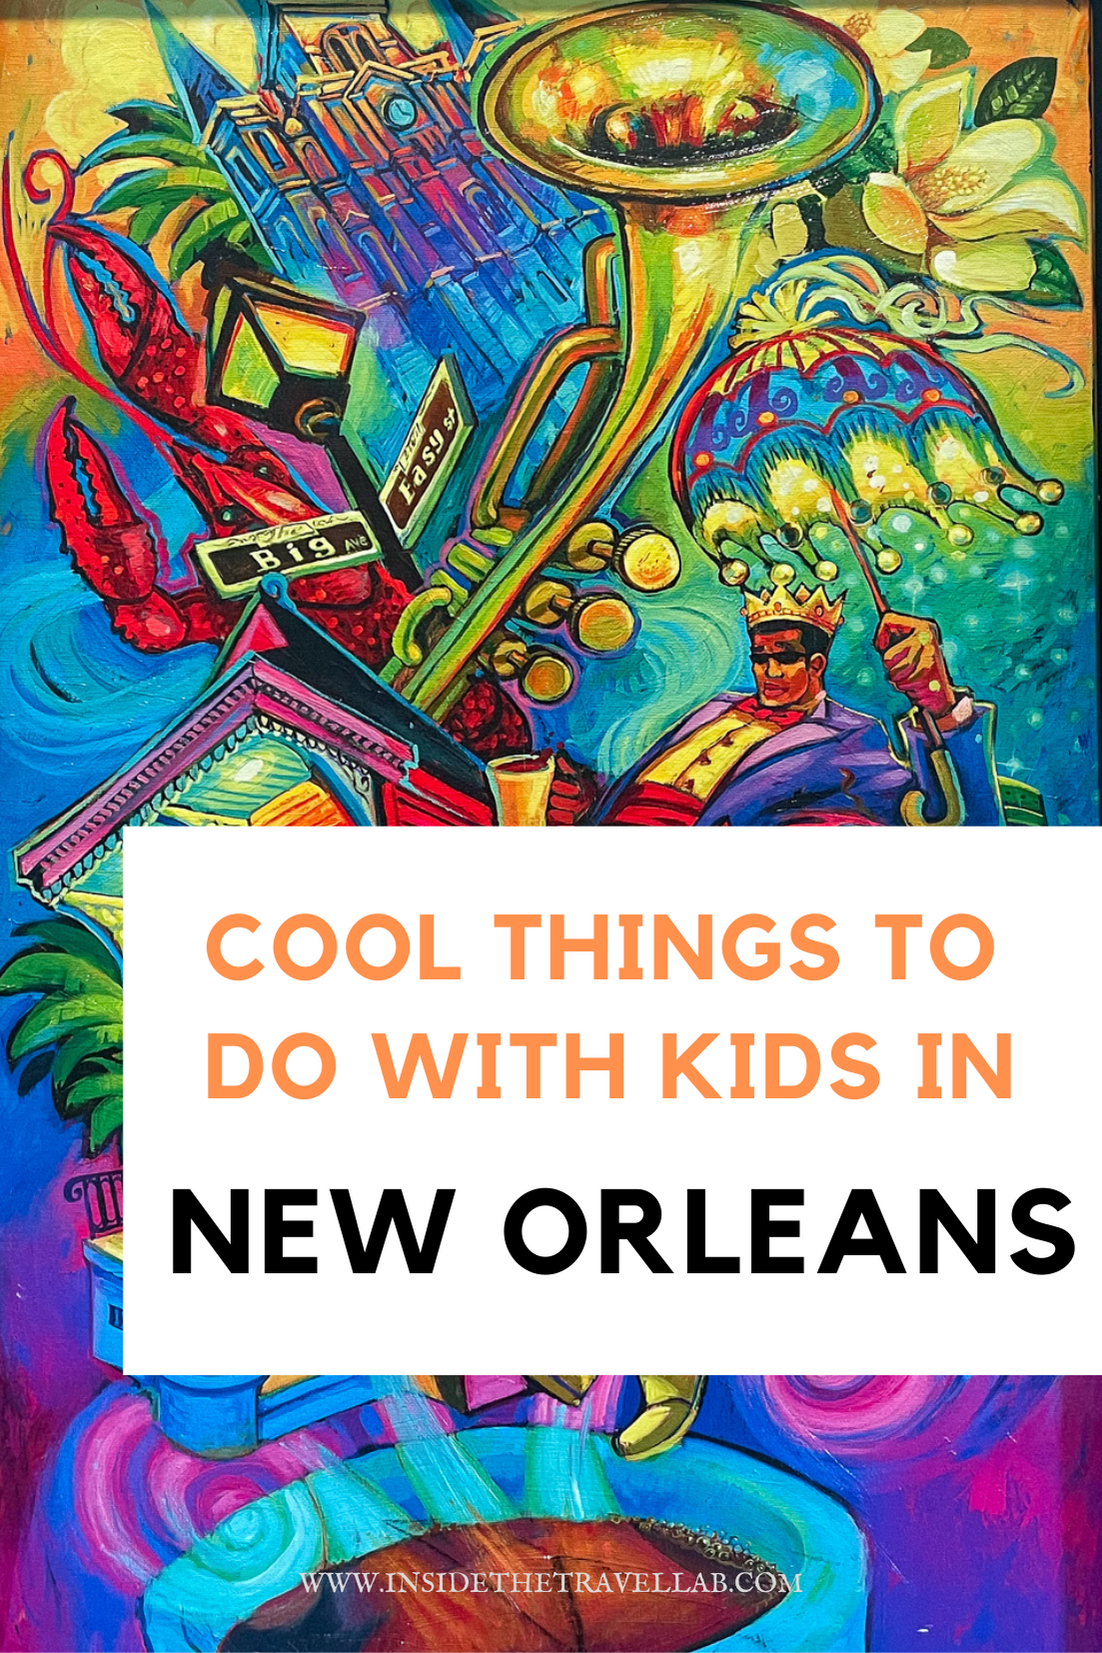 Cool things to do with kids in New Orleans